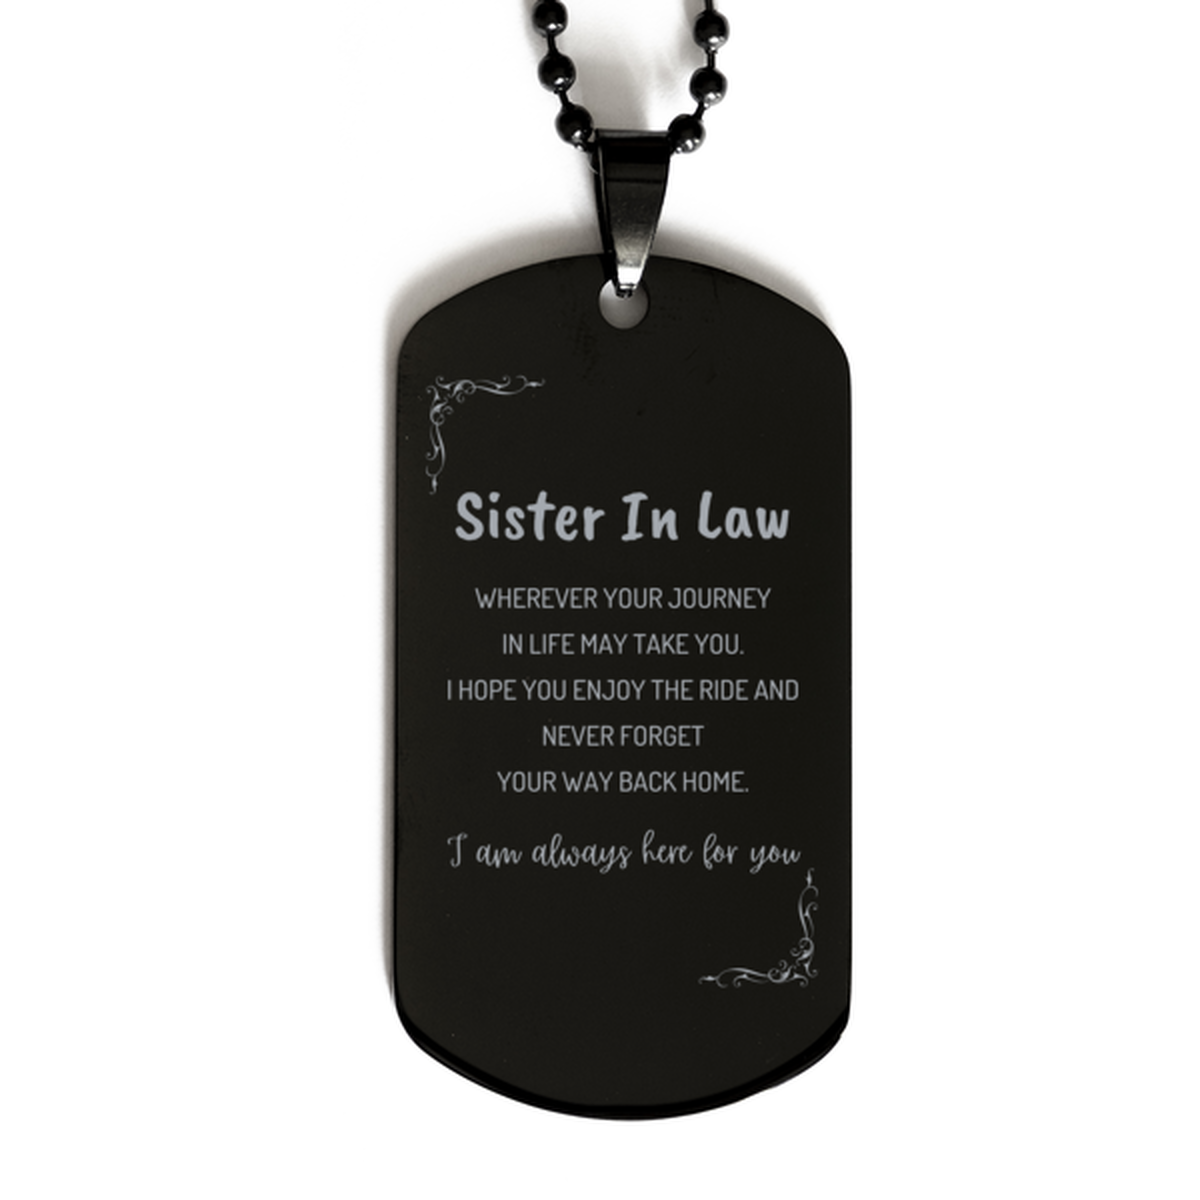 Sister In Law wherever your journey in life may take you, I am always here for you Sister In Law Black Dog Tag, Awesome Christmas Gifts For Sister In Law, Sister In Law Birthday Gifts for Men Women Family Loved One